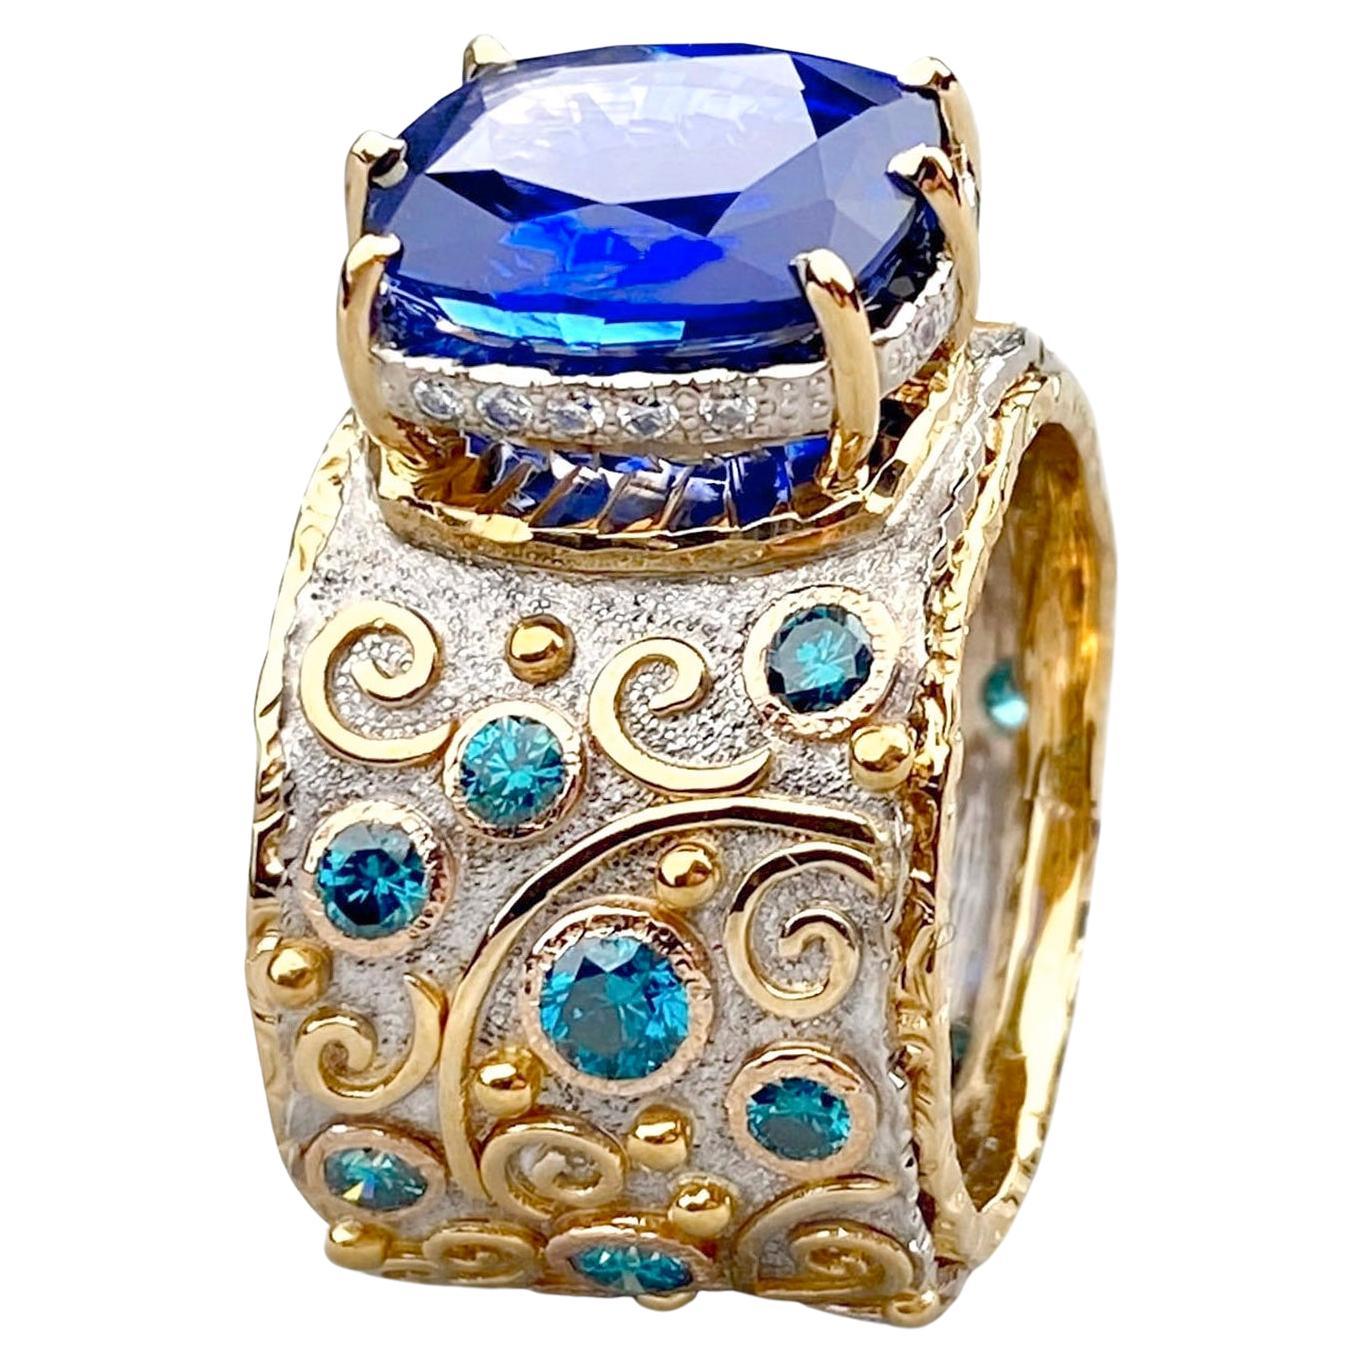 DSEF Certified 6.15 Carat Sapphire Diamond Cocktail Ring For Sale